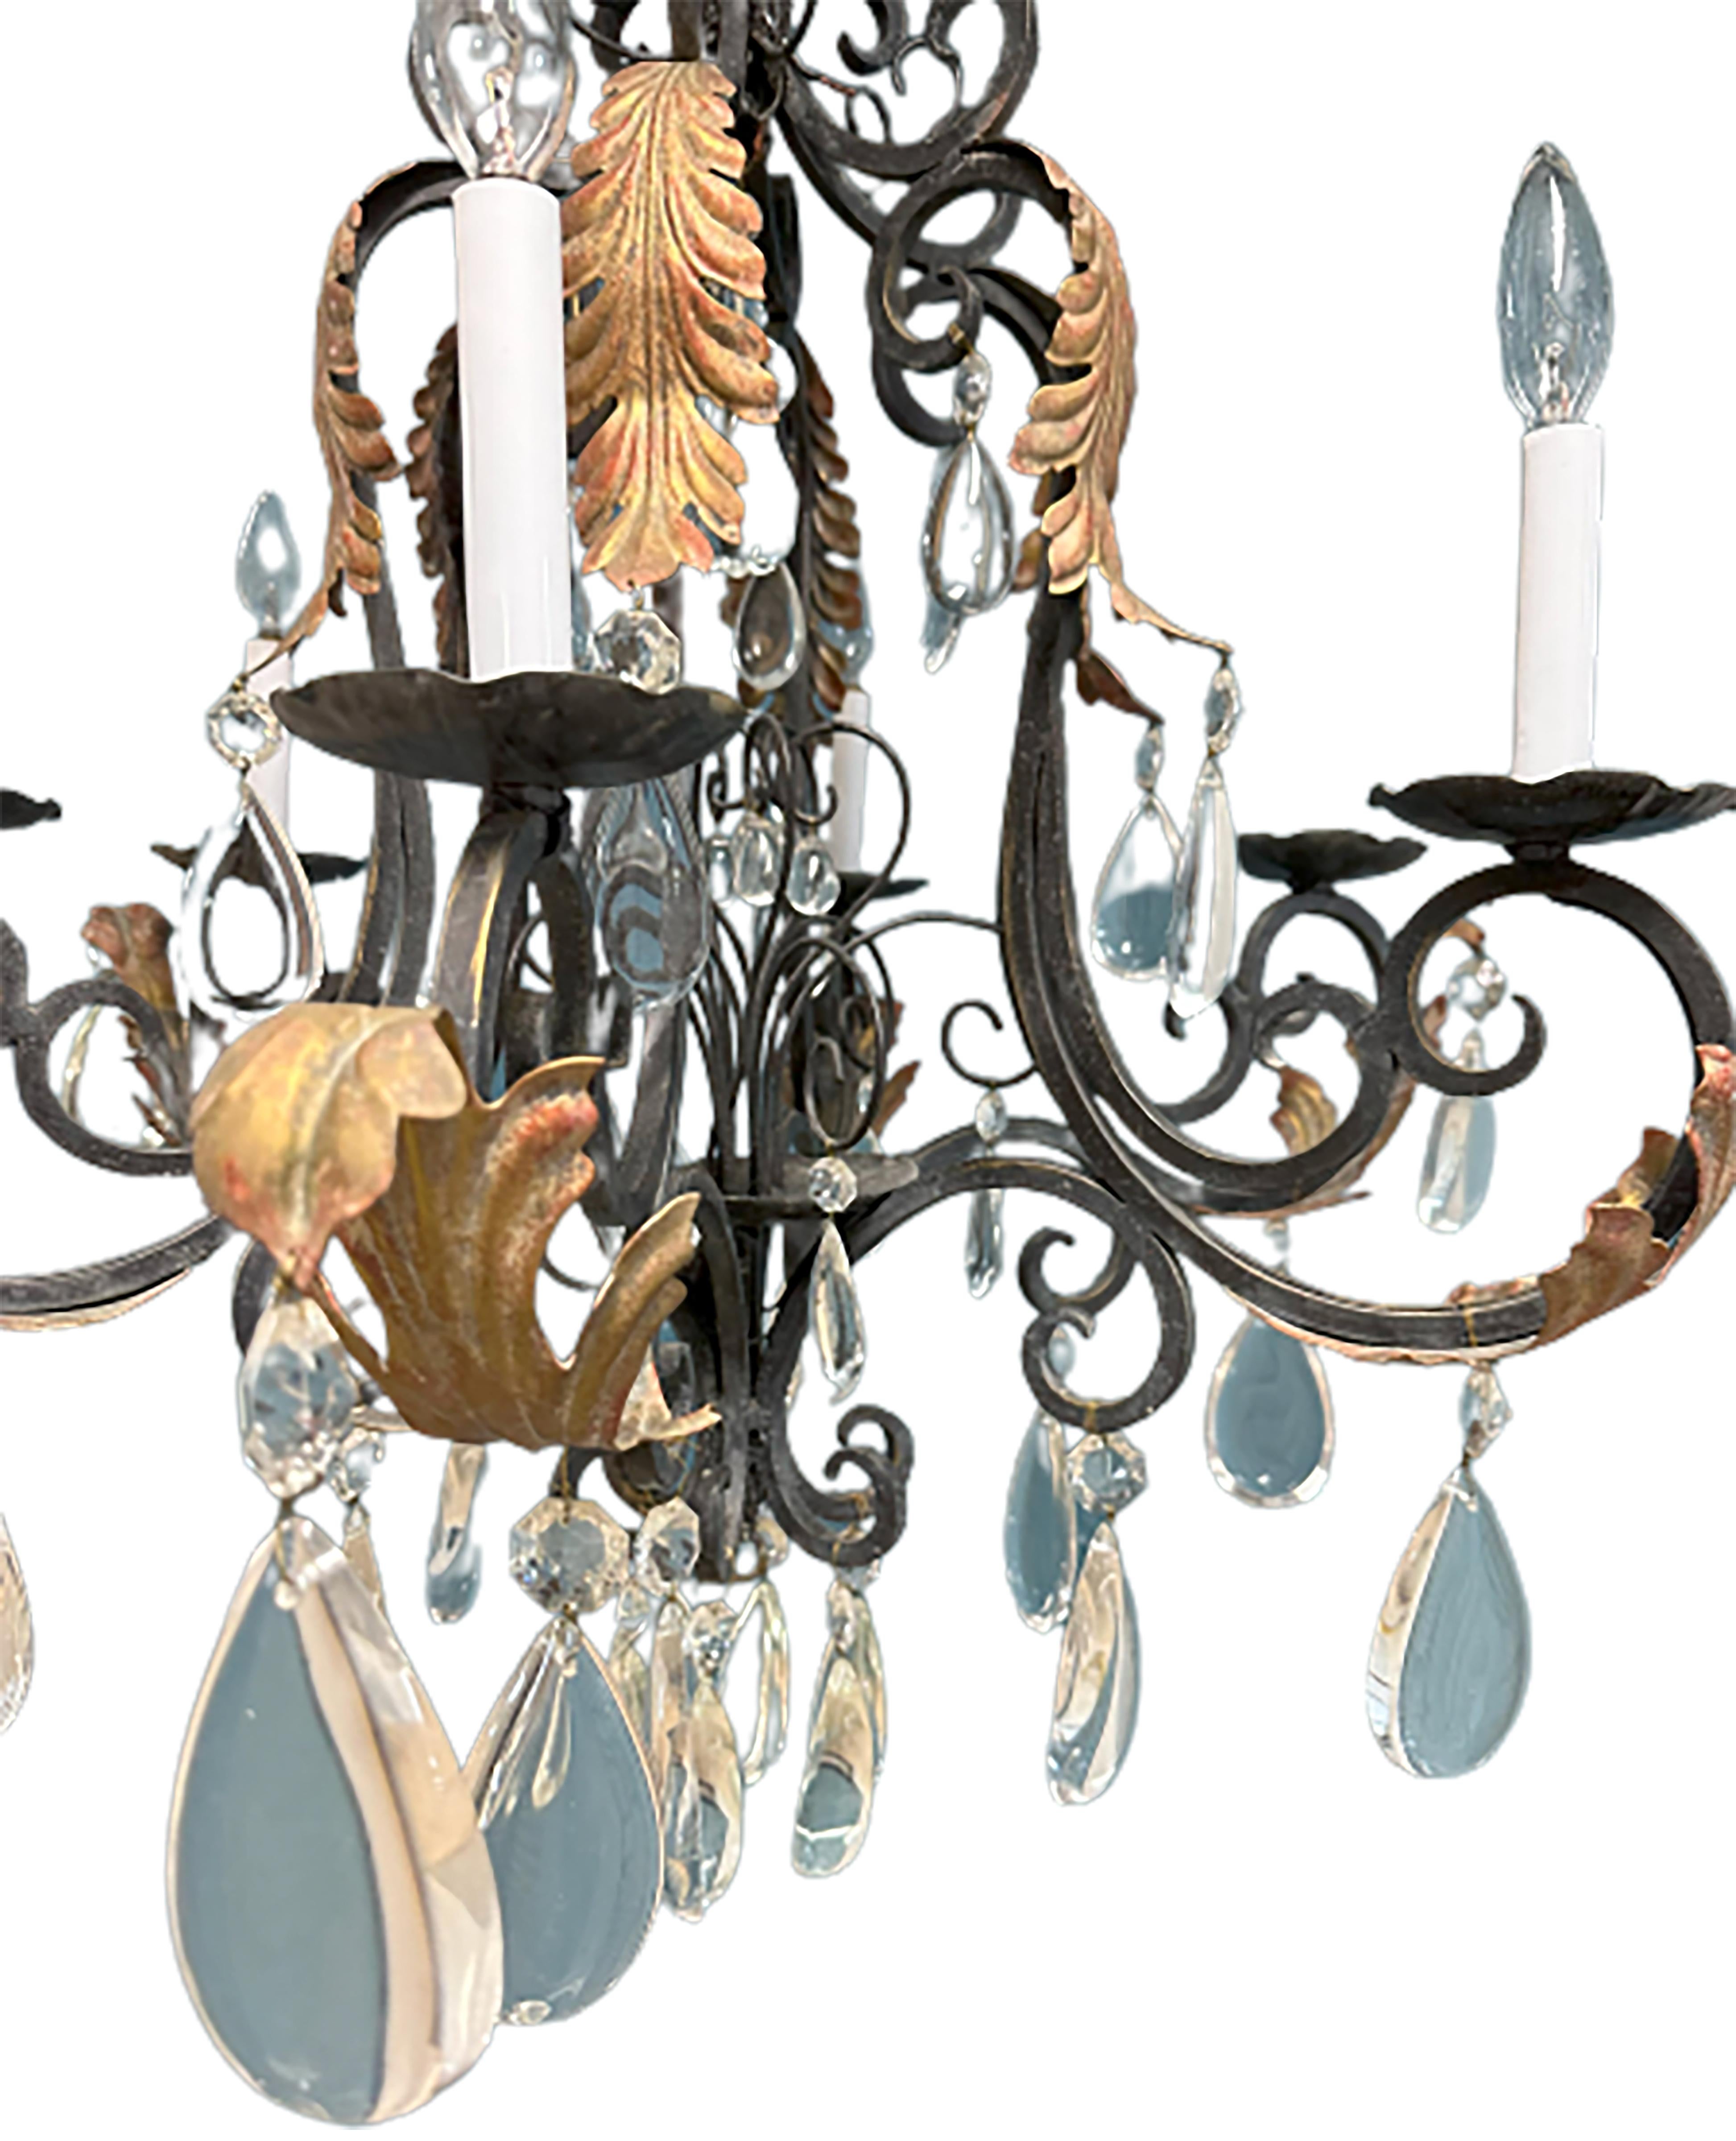 A handsome handmade iron chandelier. 21st century made. Gilt acanthus leaves with glass cut droplets ornament the elegant french curves. 

In very good condition.

No obvious markings on the piece. 

This piece has an elegant flow to its shape and